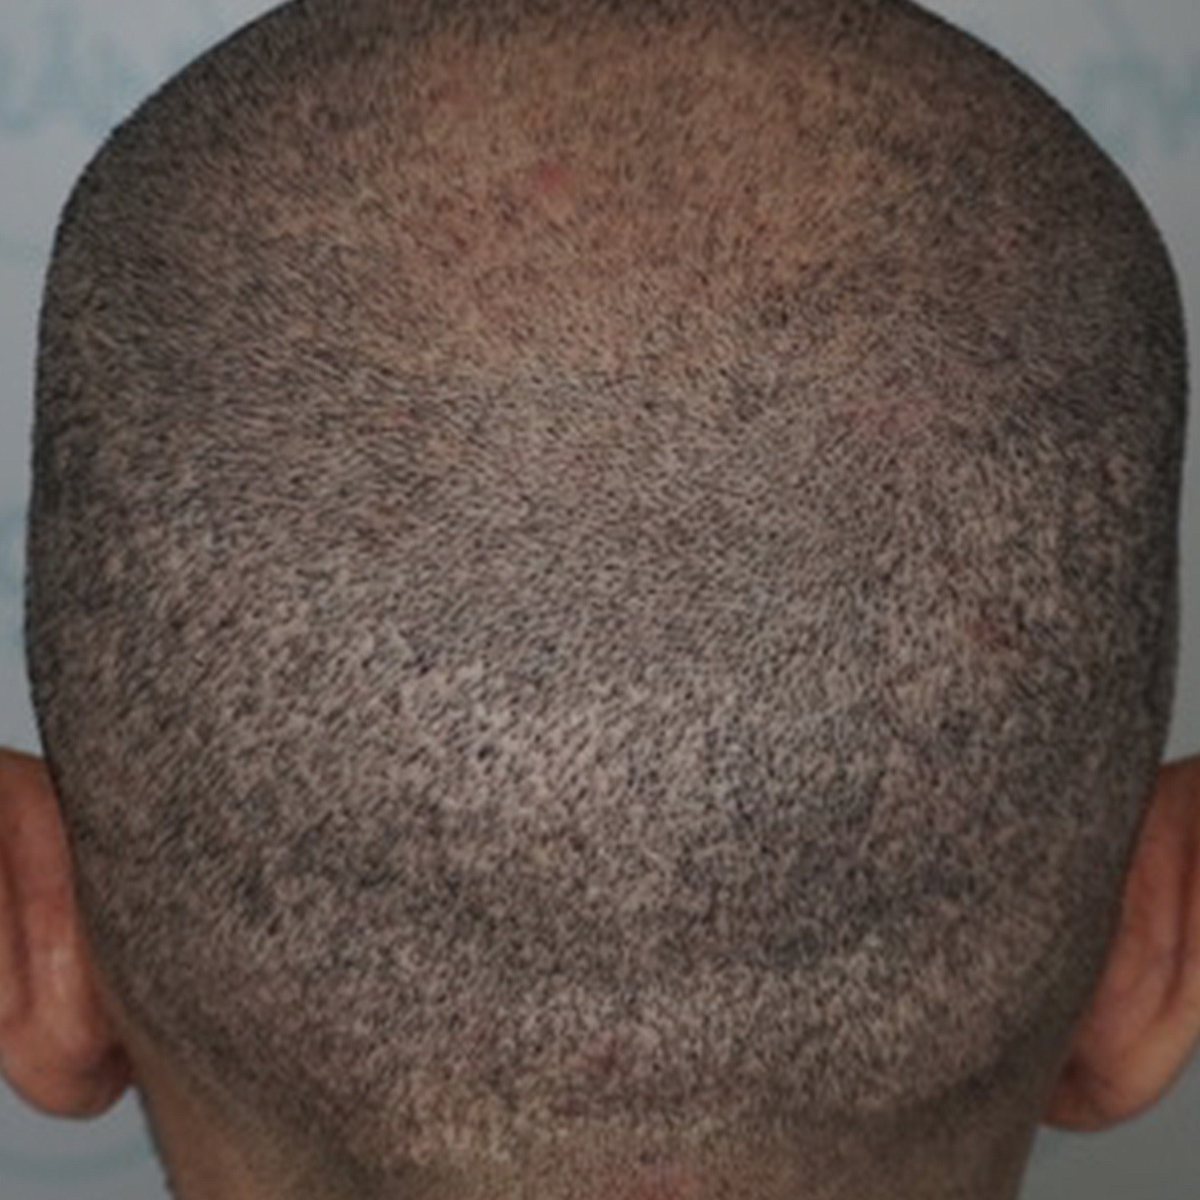 FUE Scars - Before Treatment